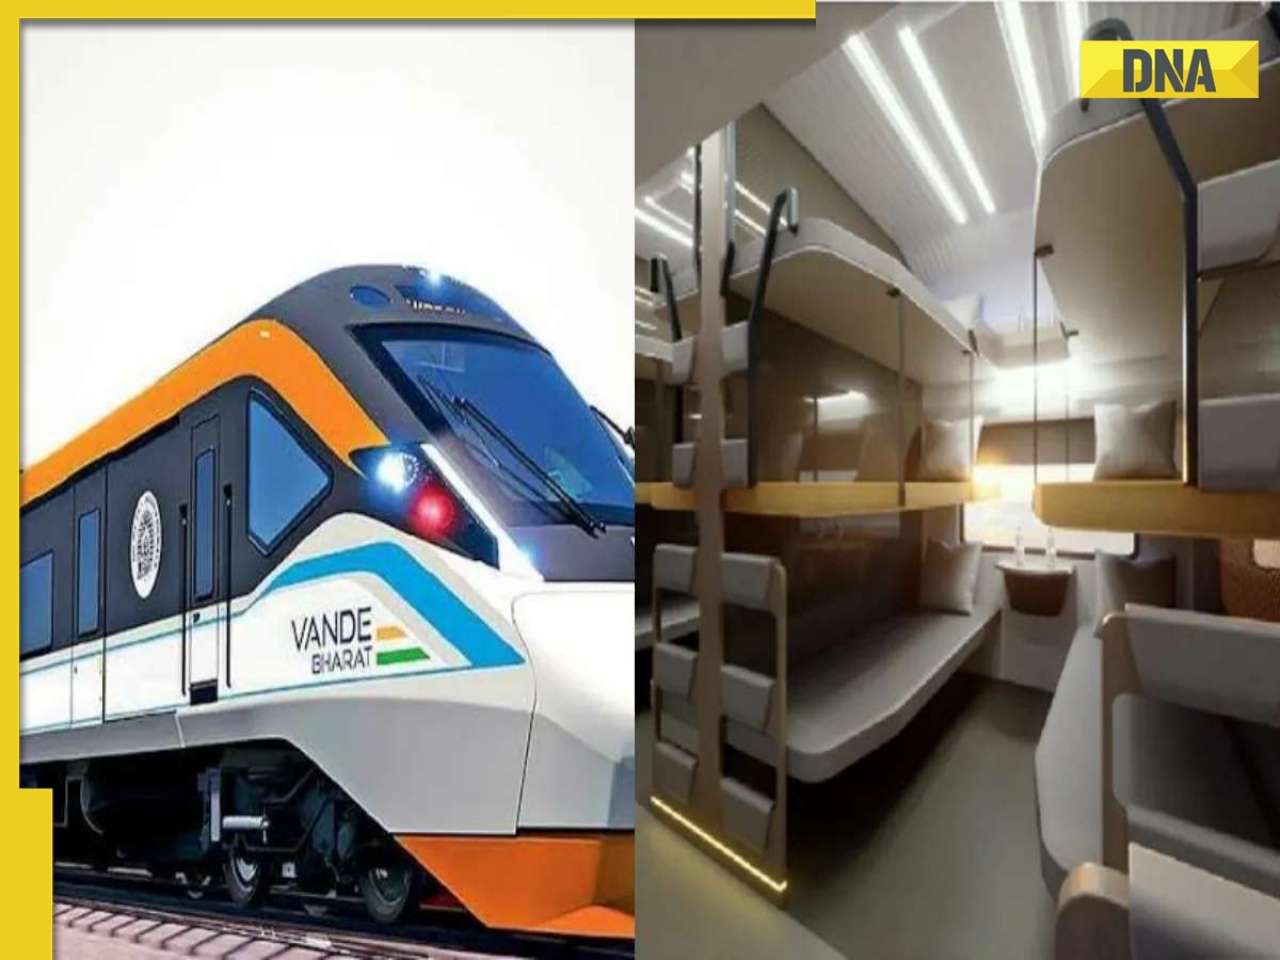 Vande Bharat sleeper train to start trial run by August 15, check route details, top speed to be...